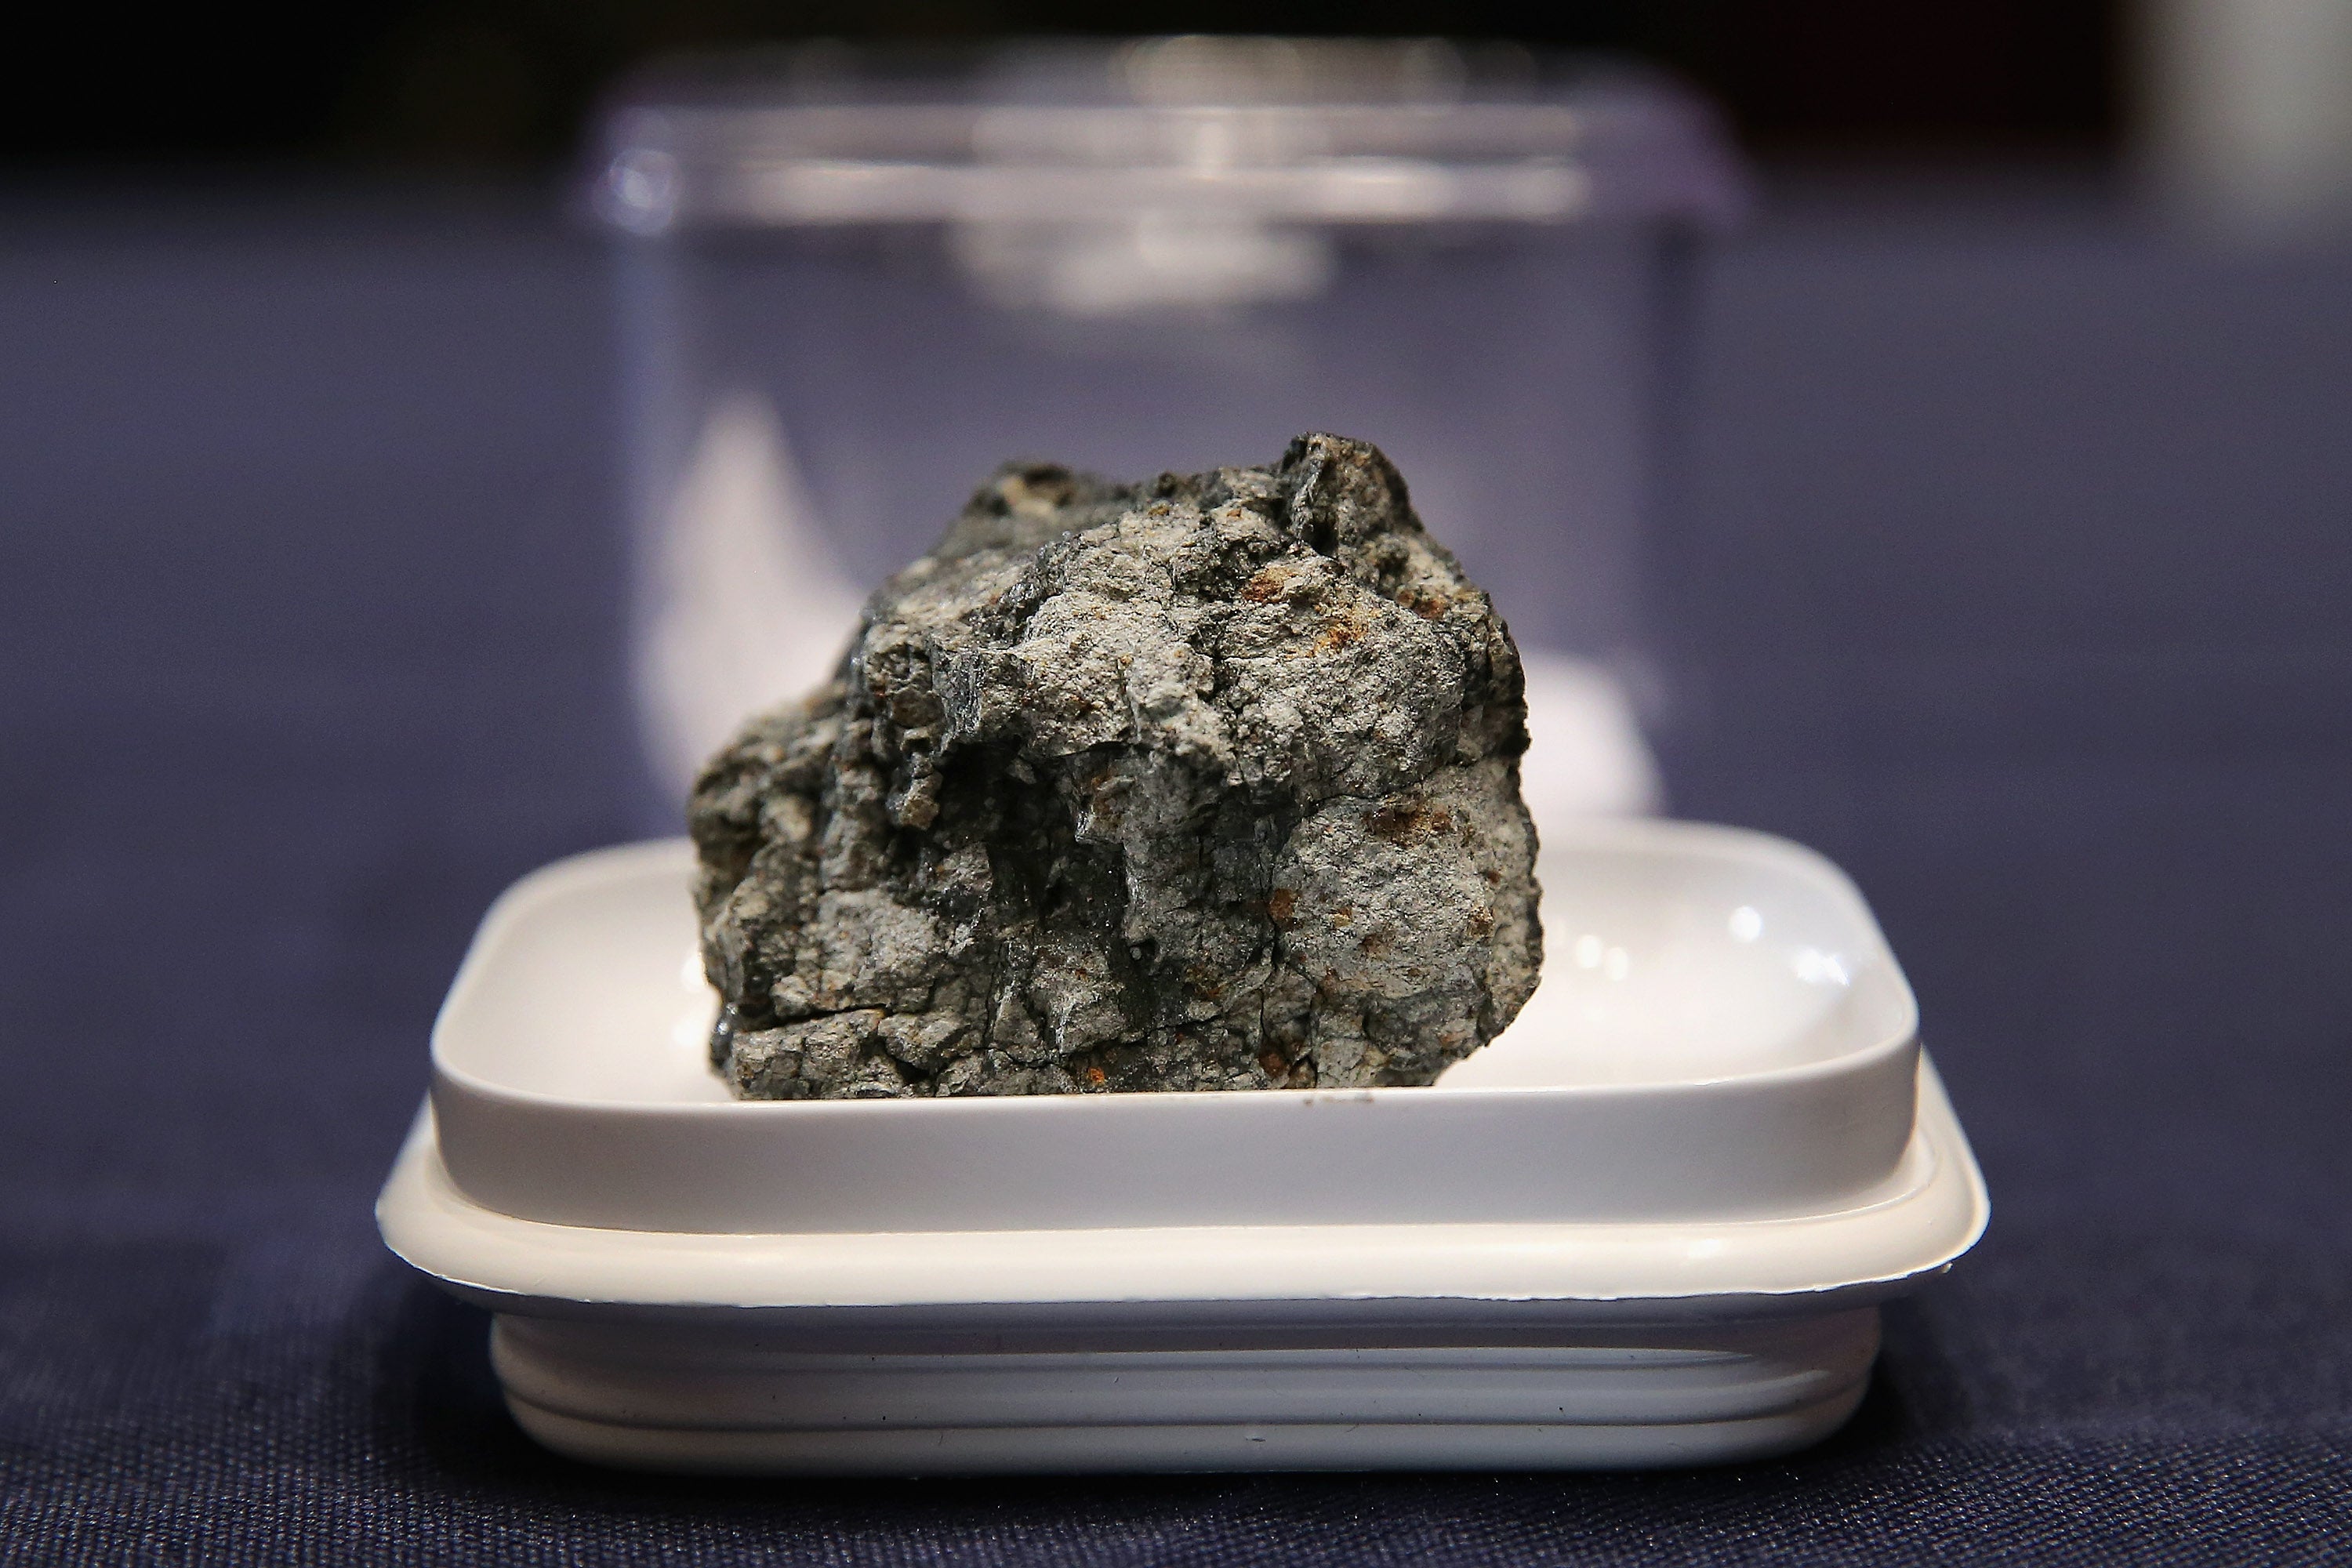 A fragment of the Chelyabinsk meteor on display on Capitol Hill in June 2015. (Image: Chip Somodevilla, Getty Images)